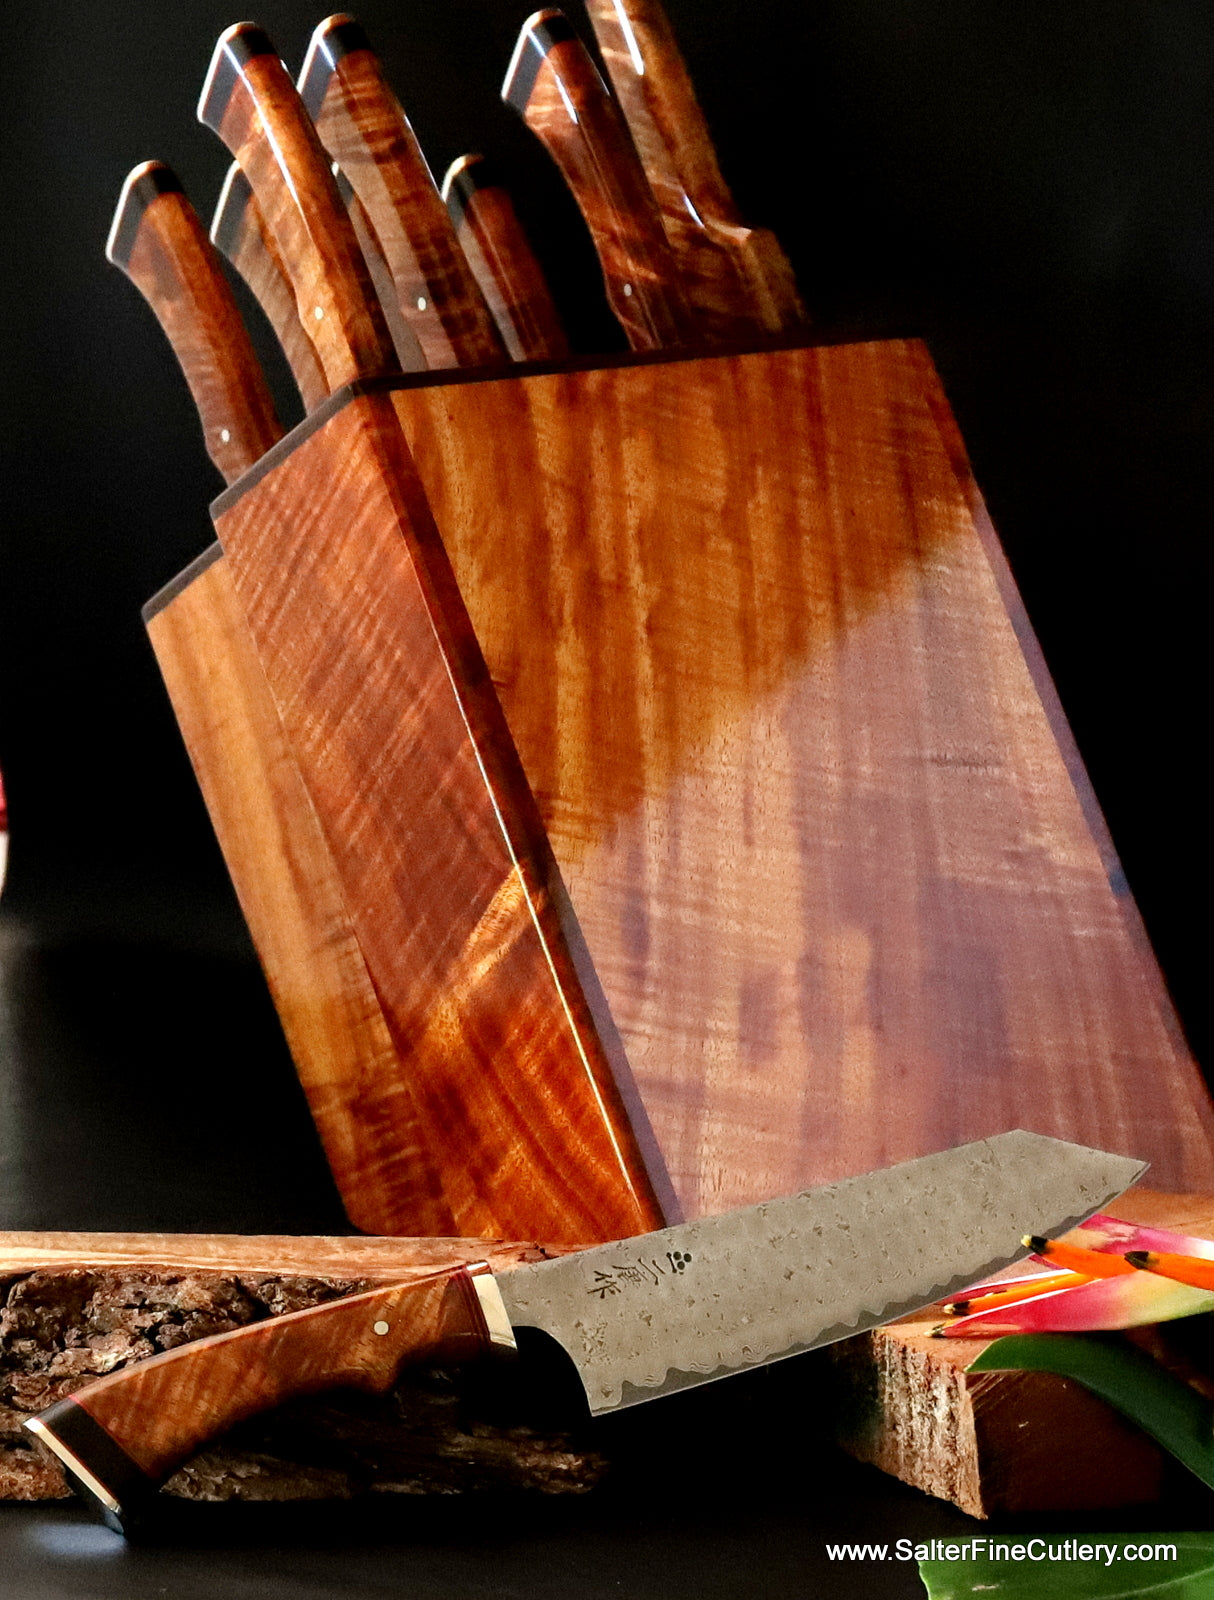 https://cdn.shopify.com/s/files/1/0993/8330/files/Chef_Knife_Set_9-pc_in_beautiful_curly_koa_wood_knife_block_stand_from_Salter_Fine_Cutlery_of_Hawaii.JPG?v=1598148107